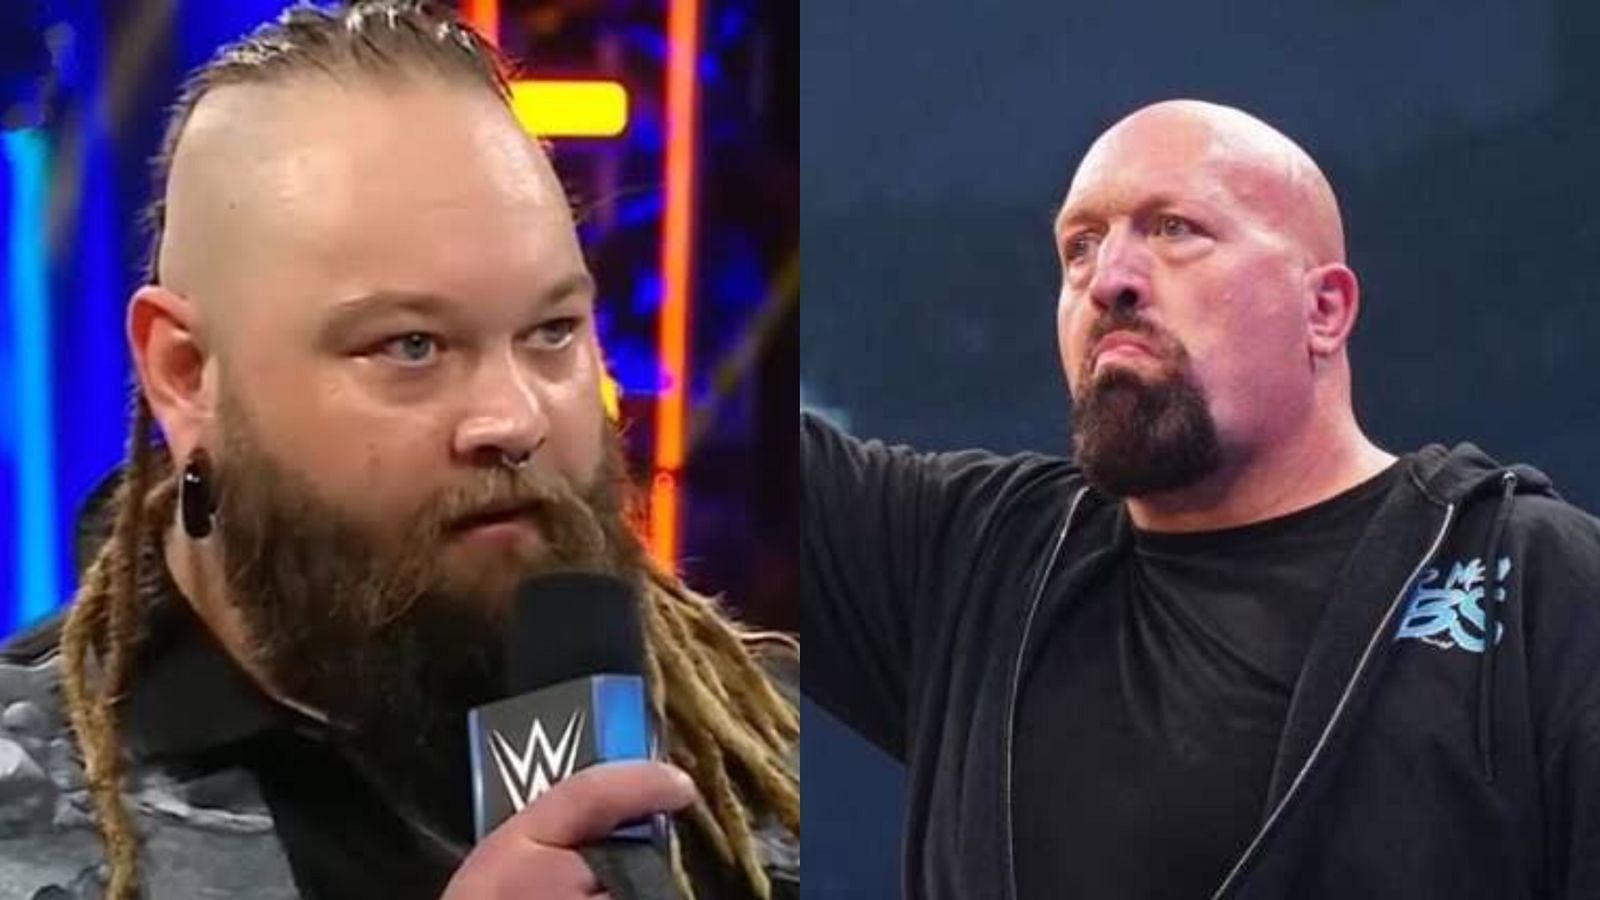 Paul Wight has shared the ring with Bray Wyatt during his time with WWE